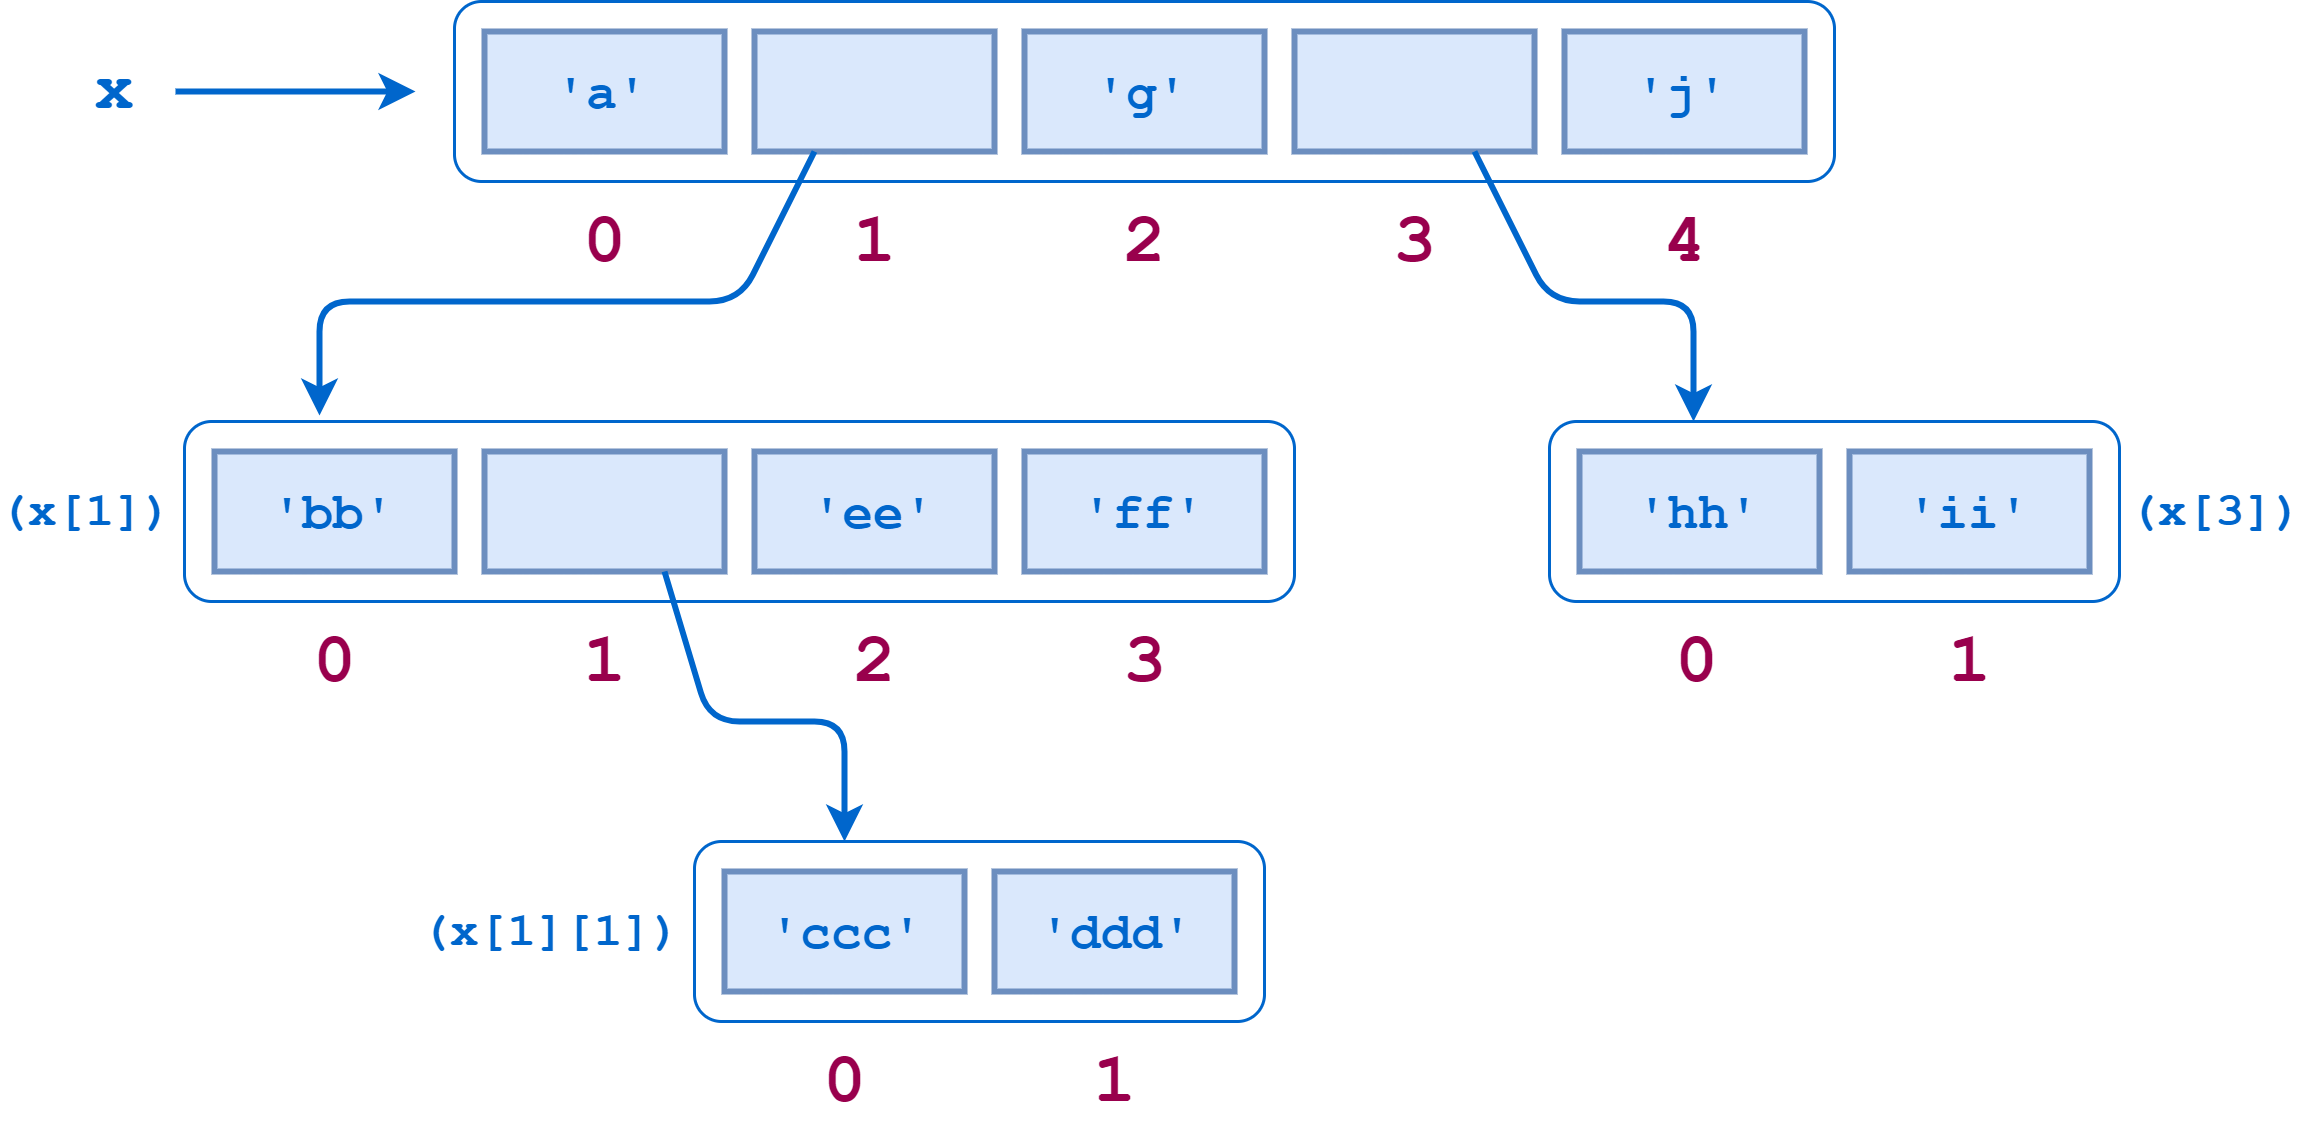 Nested lists diagram